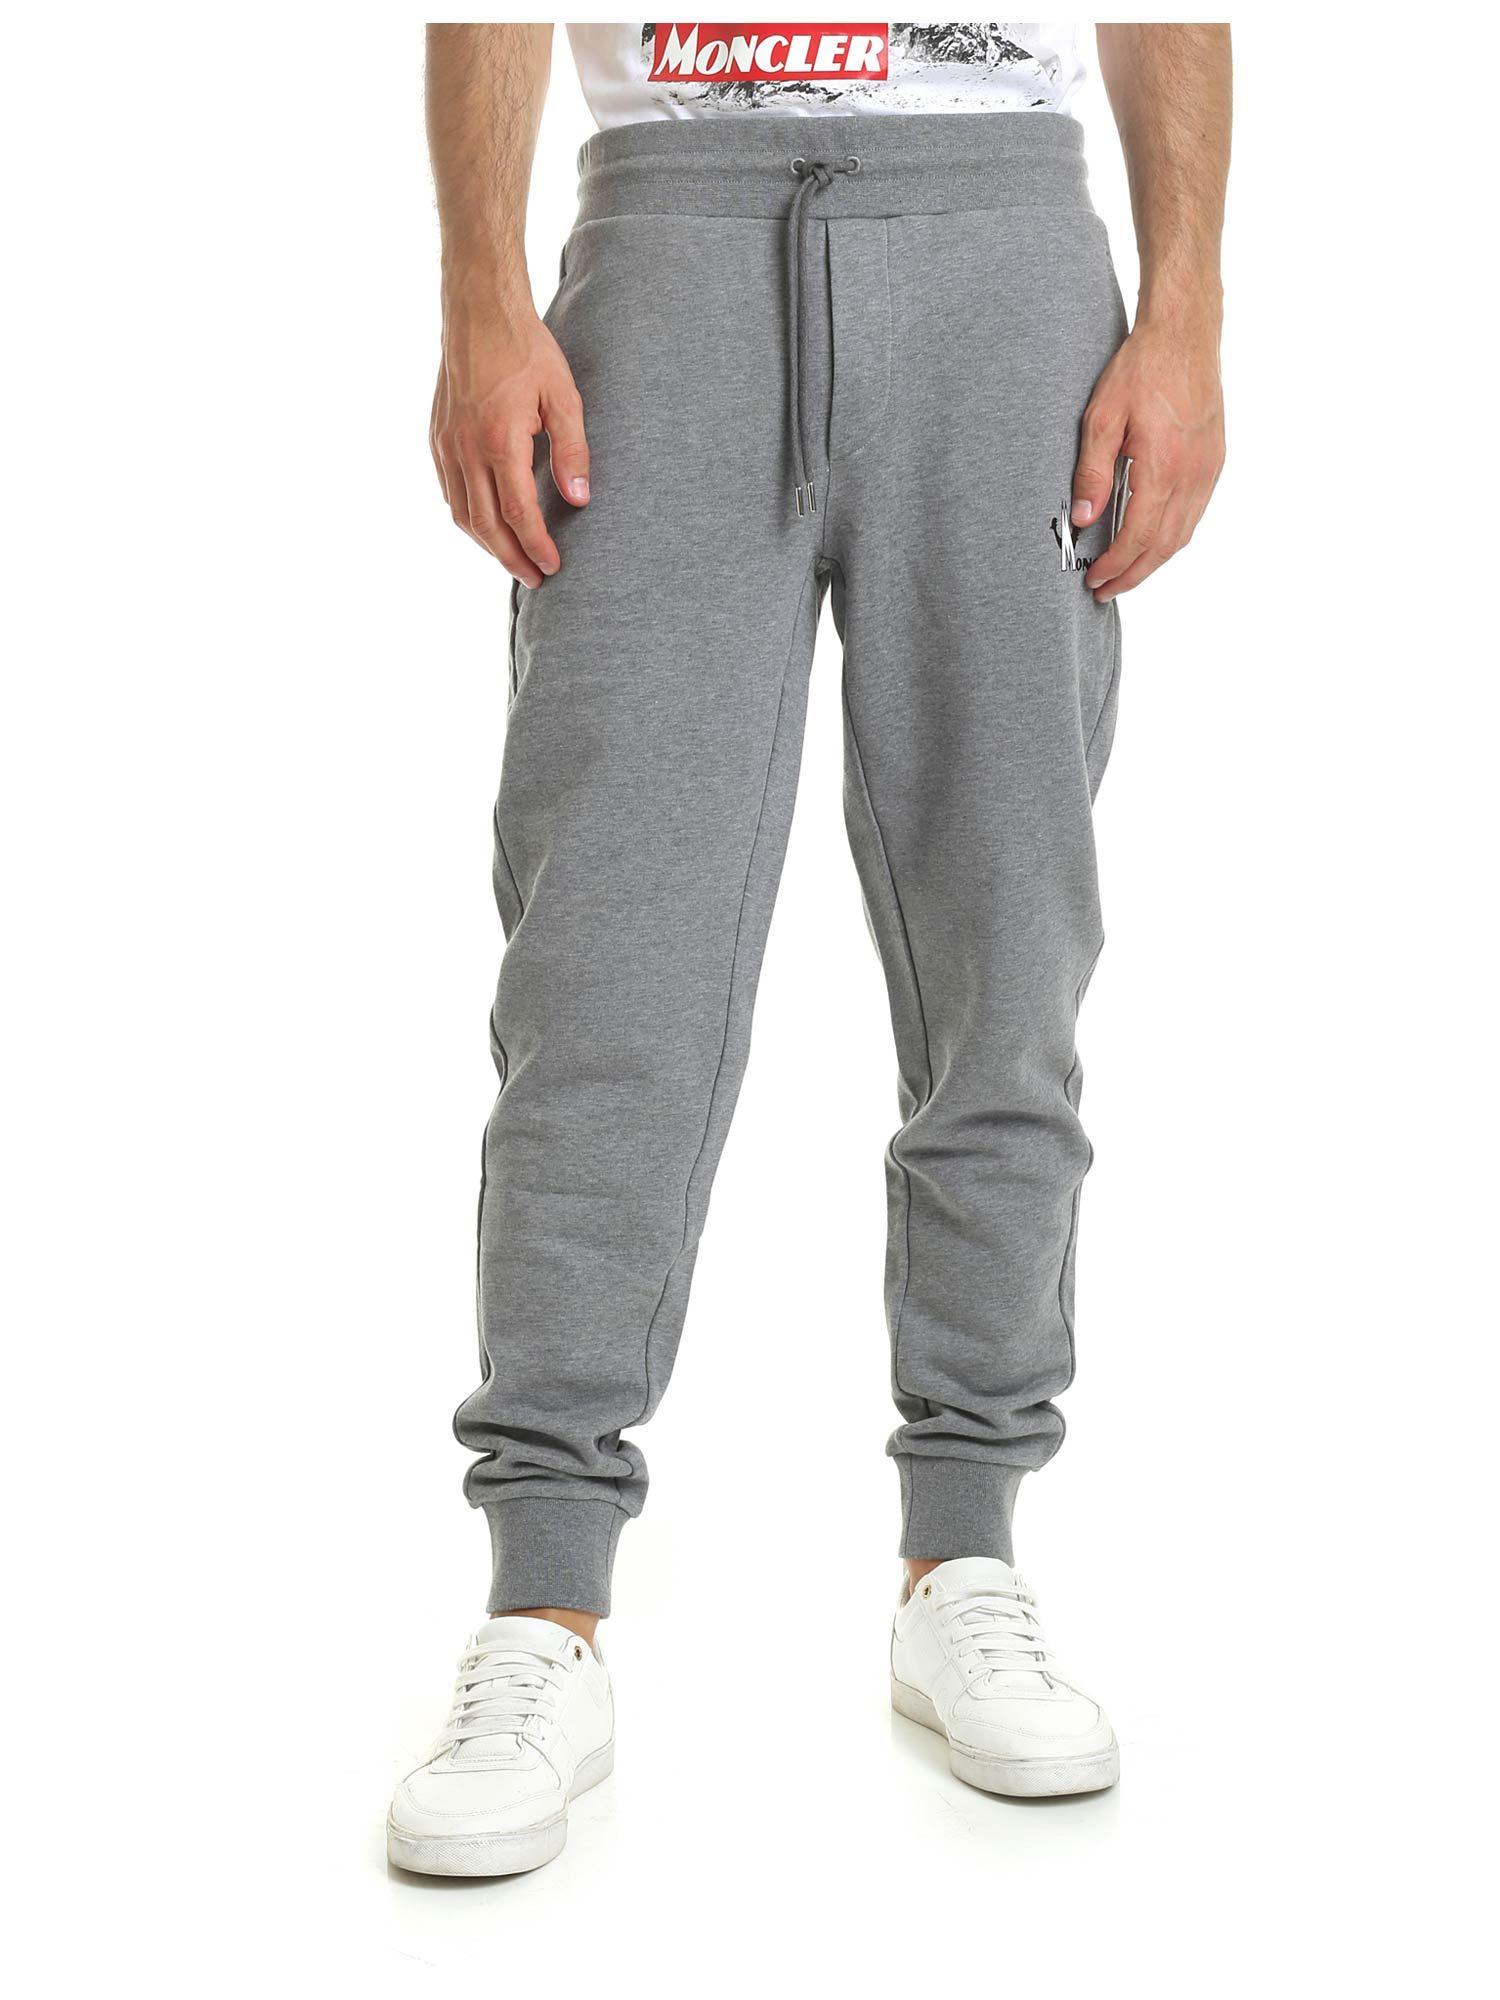 Moncler Cotton Printed Sweatpants in Grey (Gray) for Men - Lyst